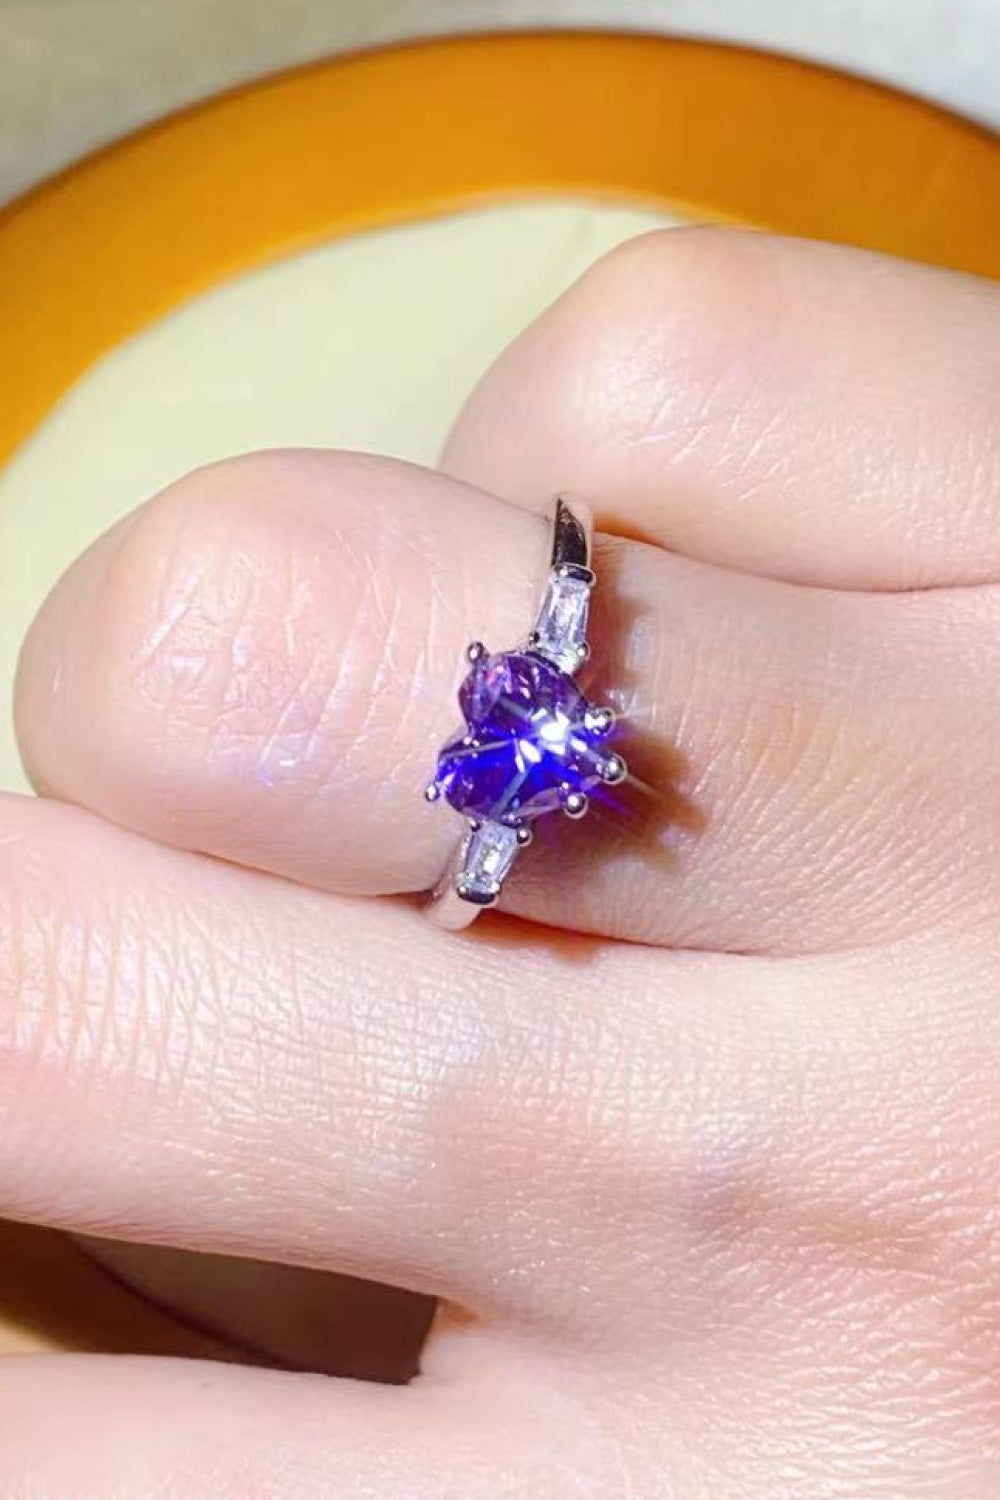 LADIES-JEWELRY—RING—1 Carat Moissanite Heart-Shaped Platinum-Plated Ring in Purple